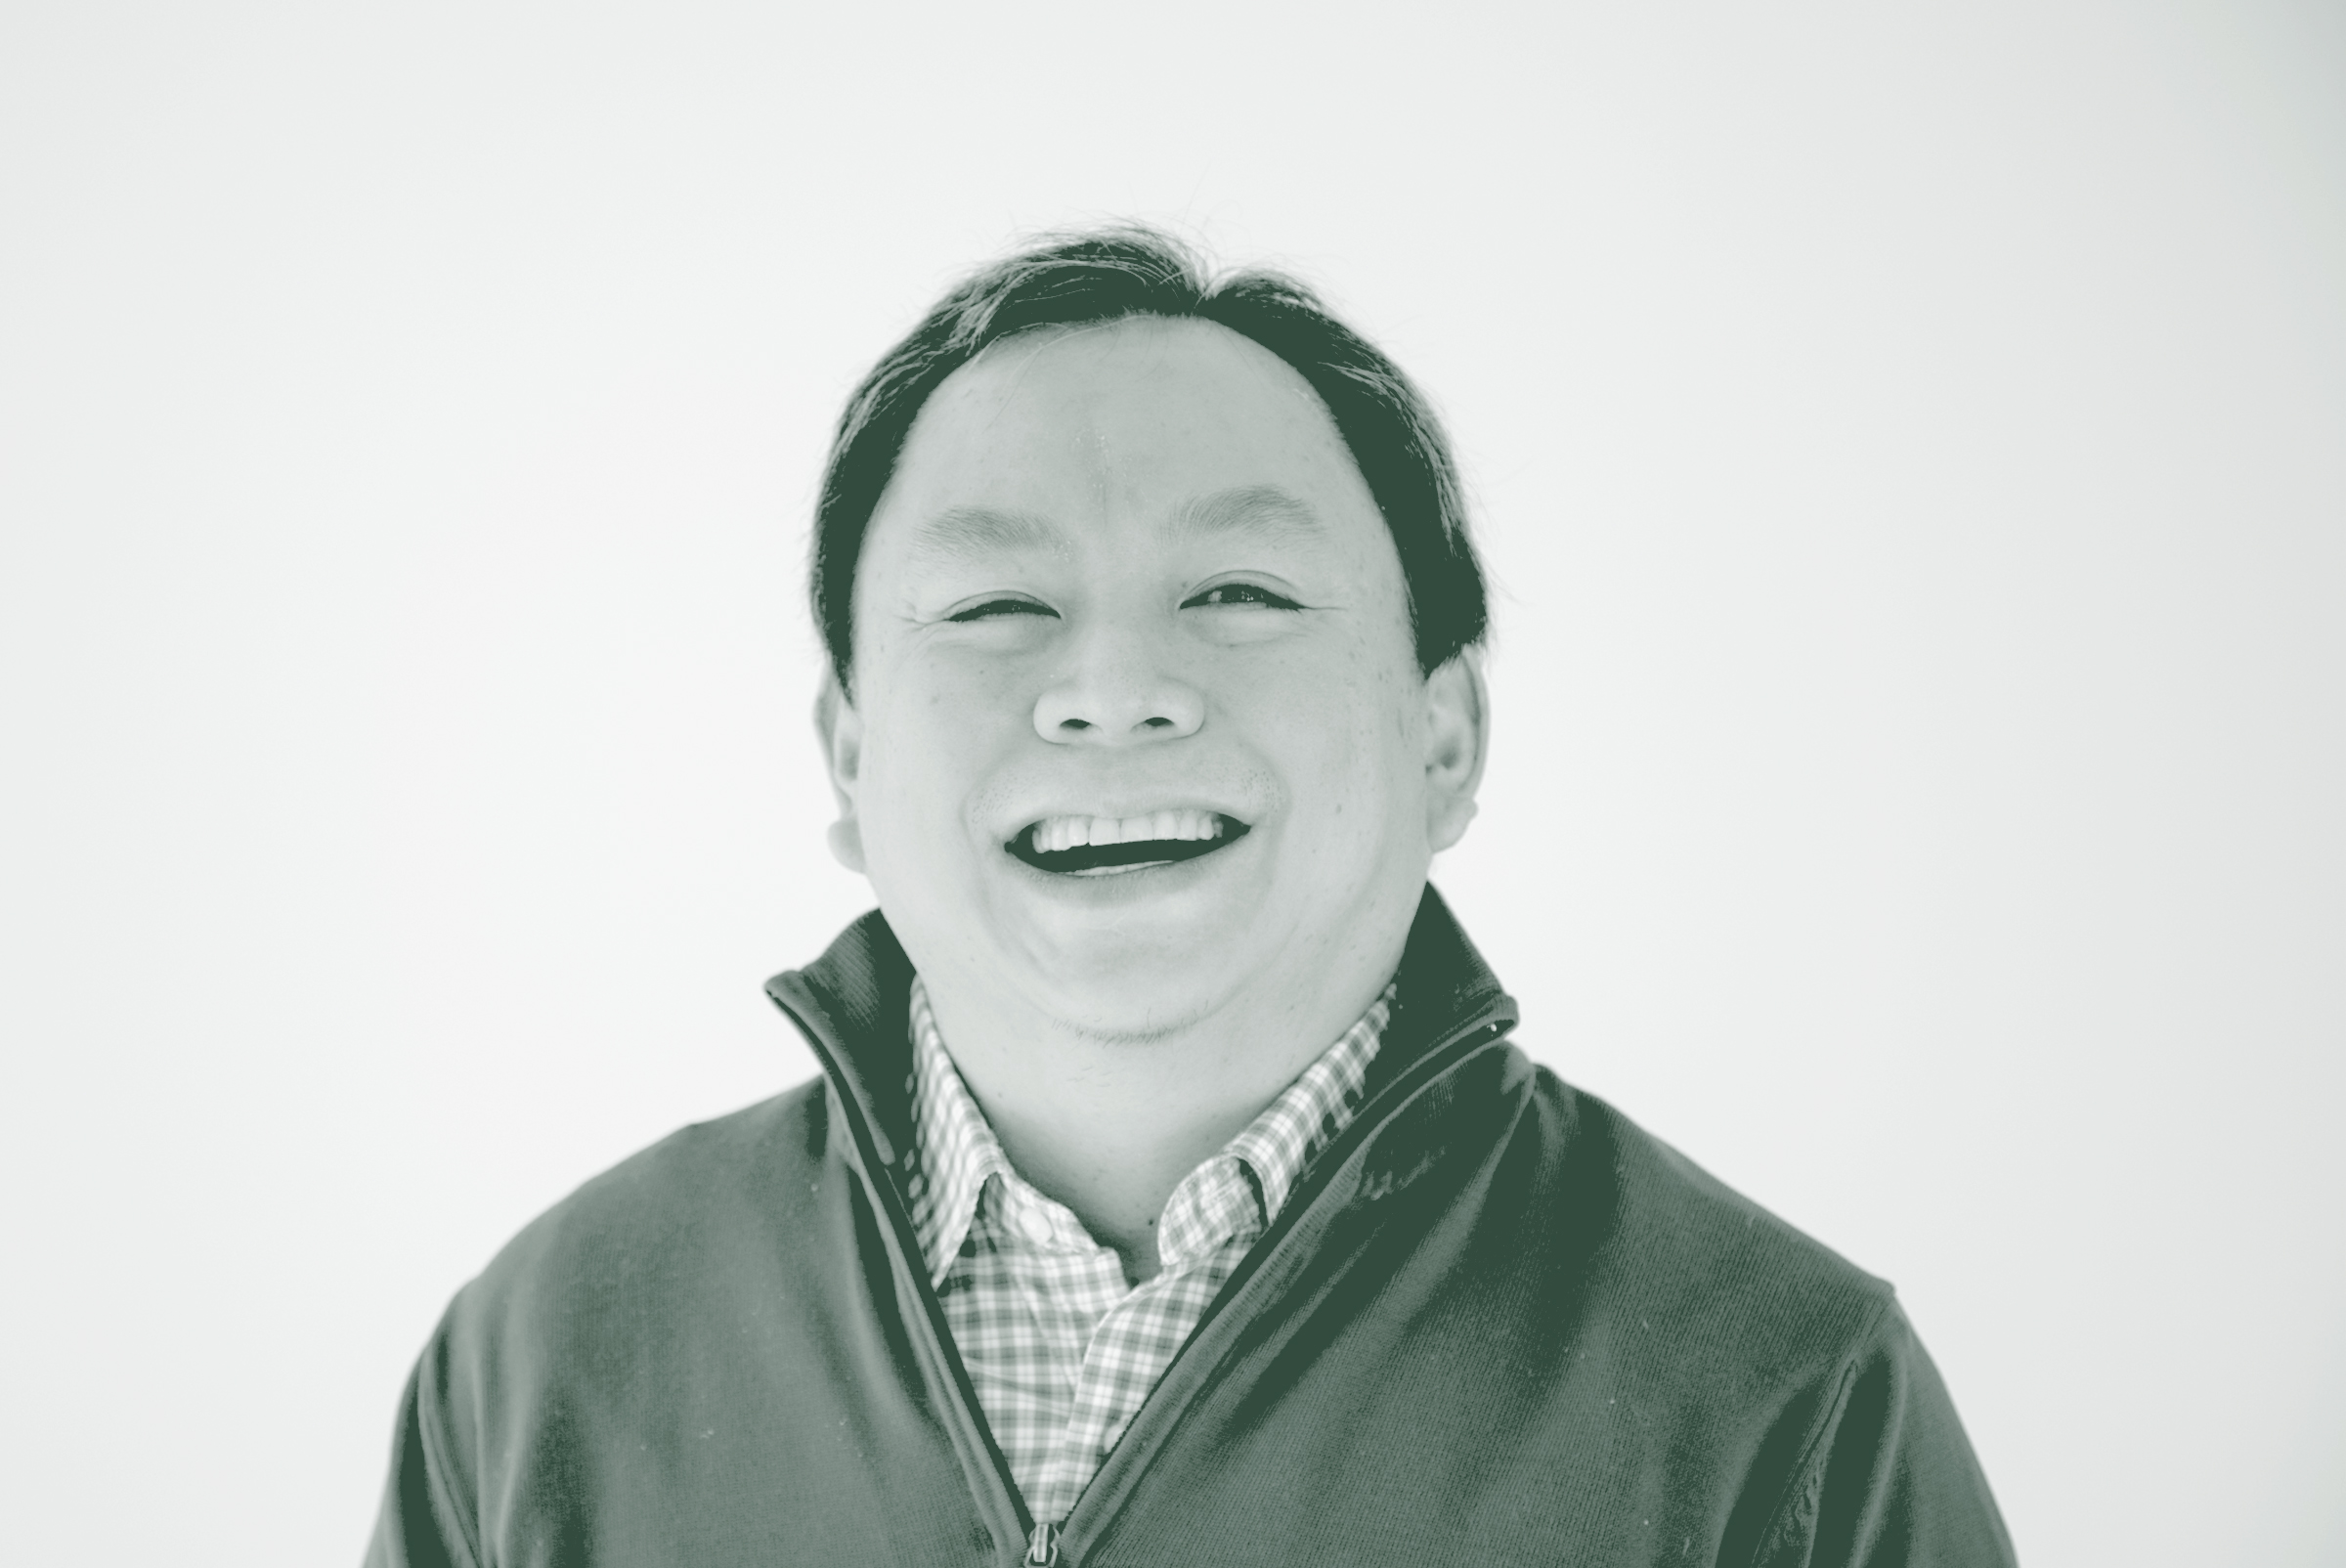 A black and white portrait of Ervin Hirsan, a Senior Project Coordinator with GFF in the Mixed-Use & Multifamily Studio, in front of a white background.